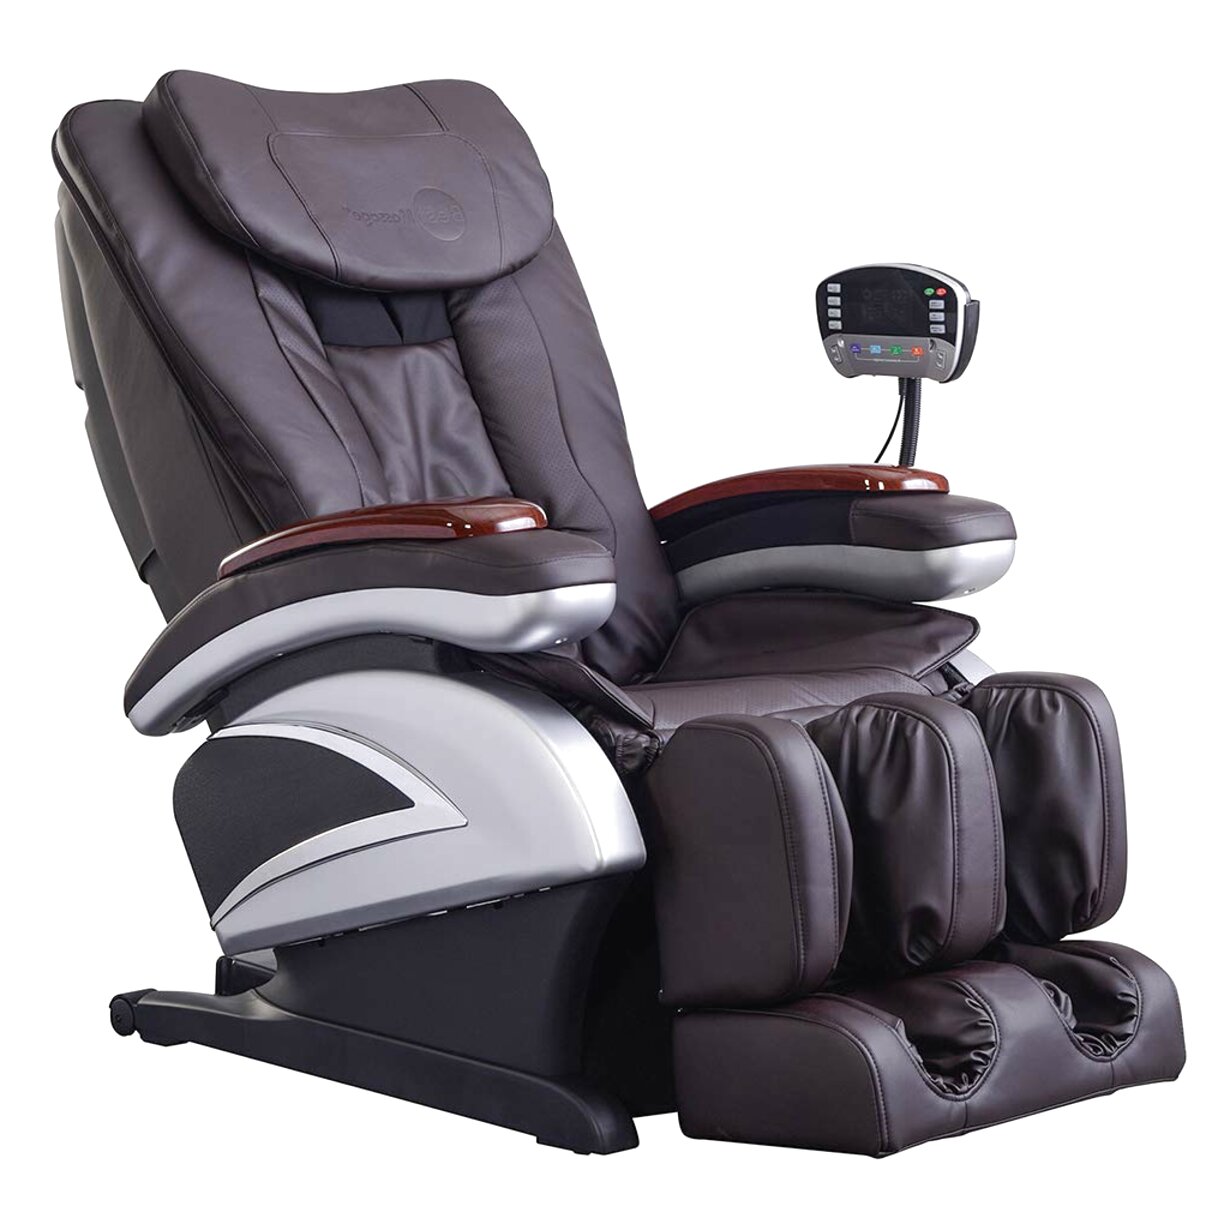 Electric Massage Chair for sale in UK | 86 used Electric Massage Chairs